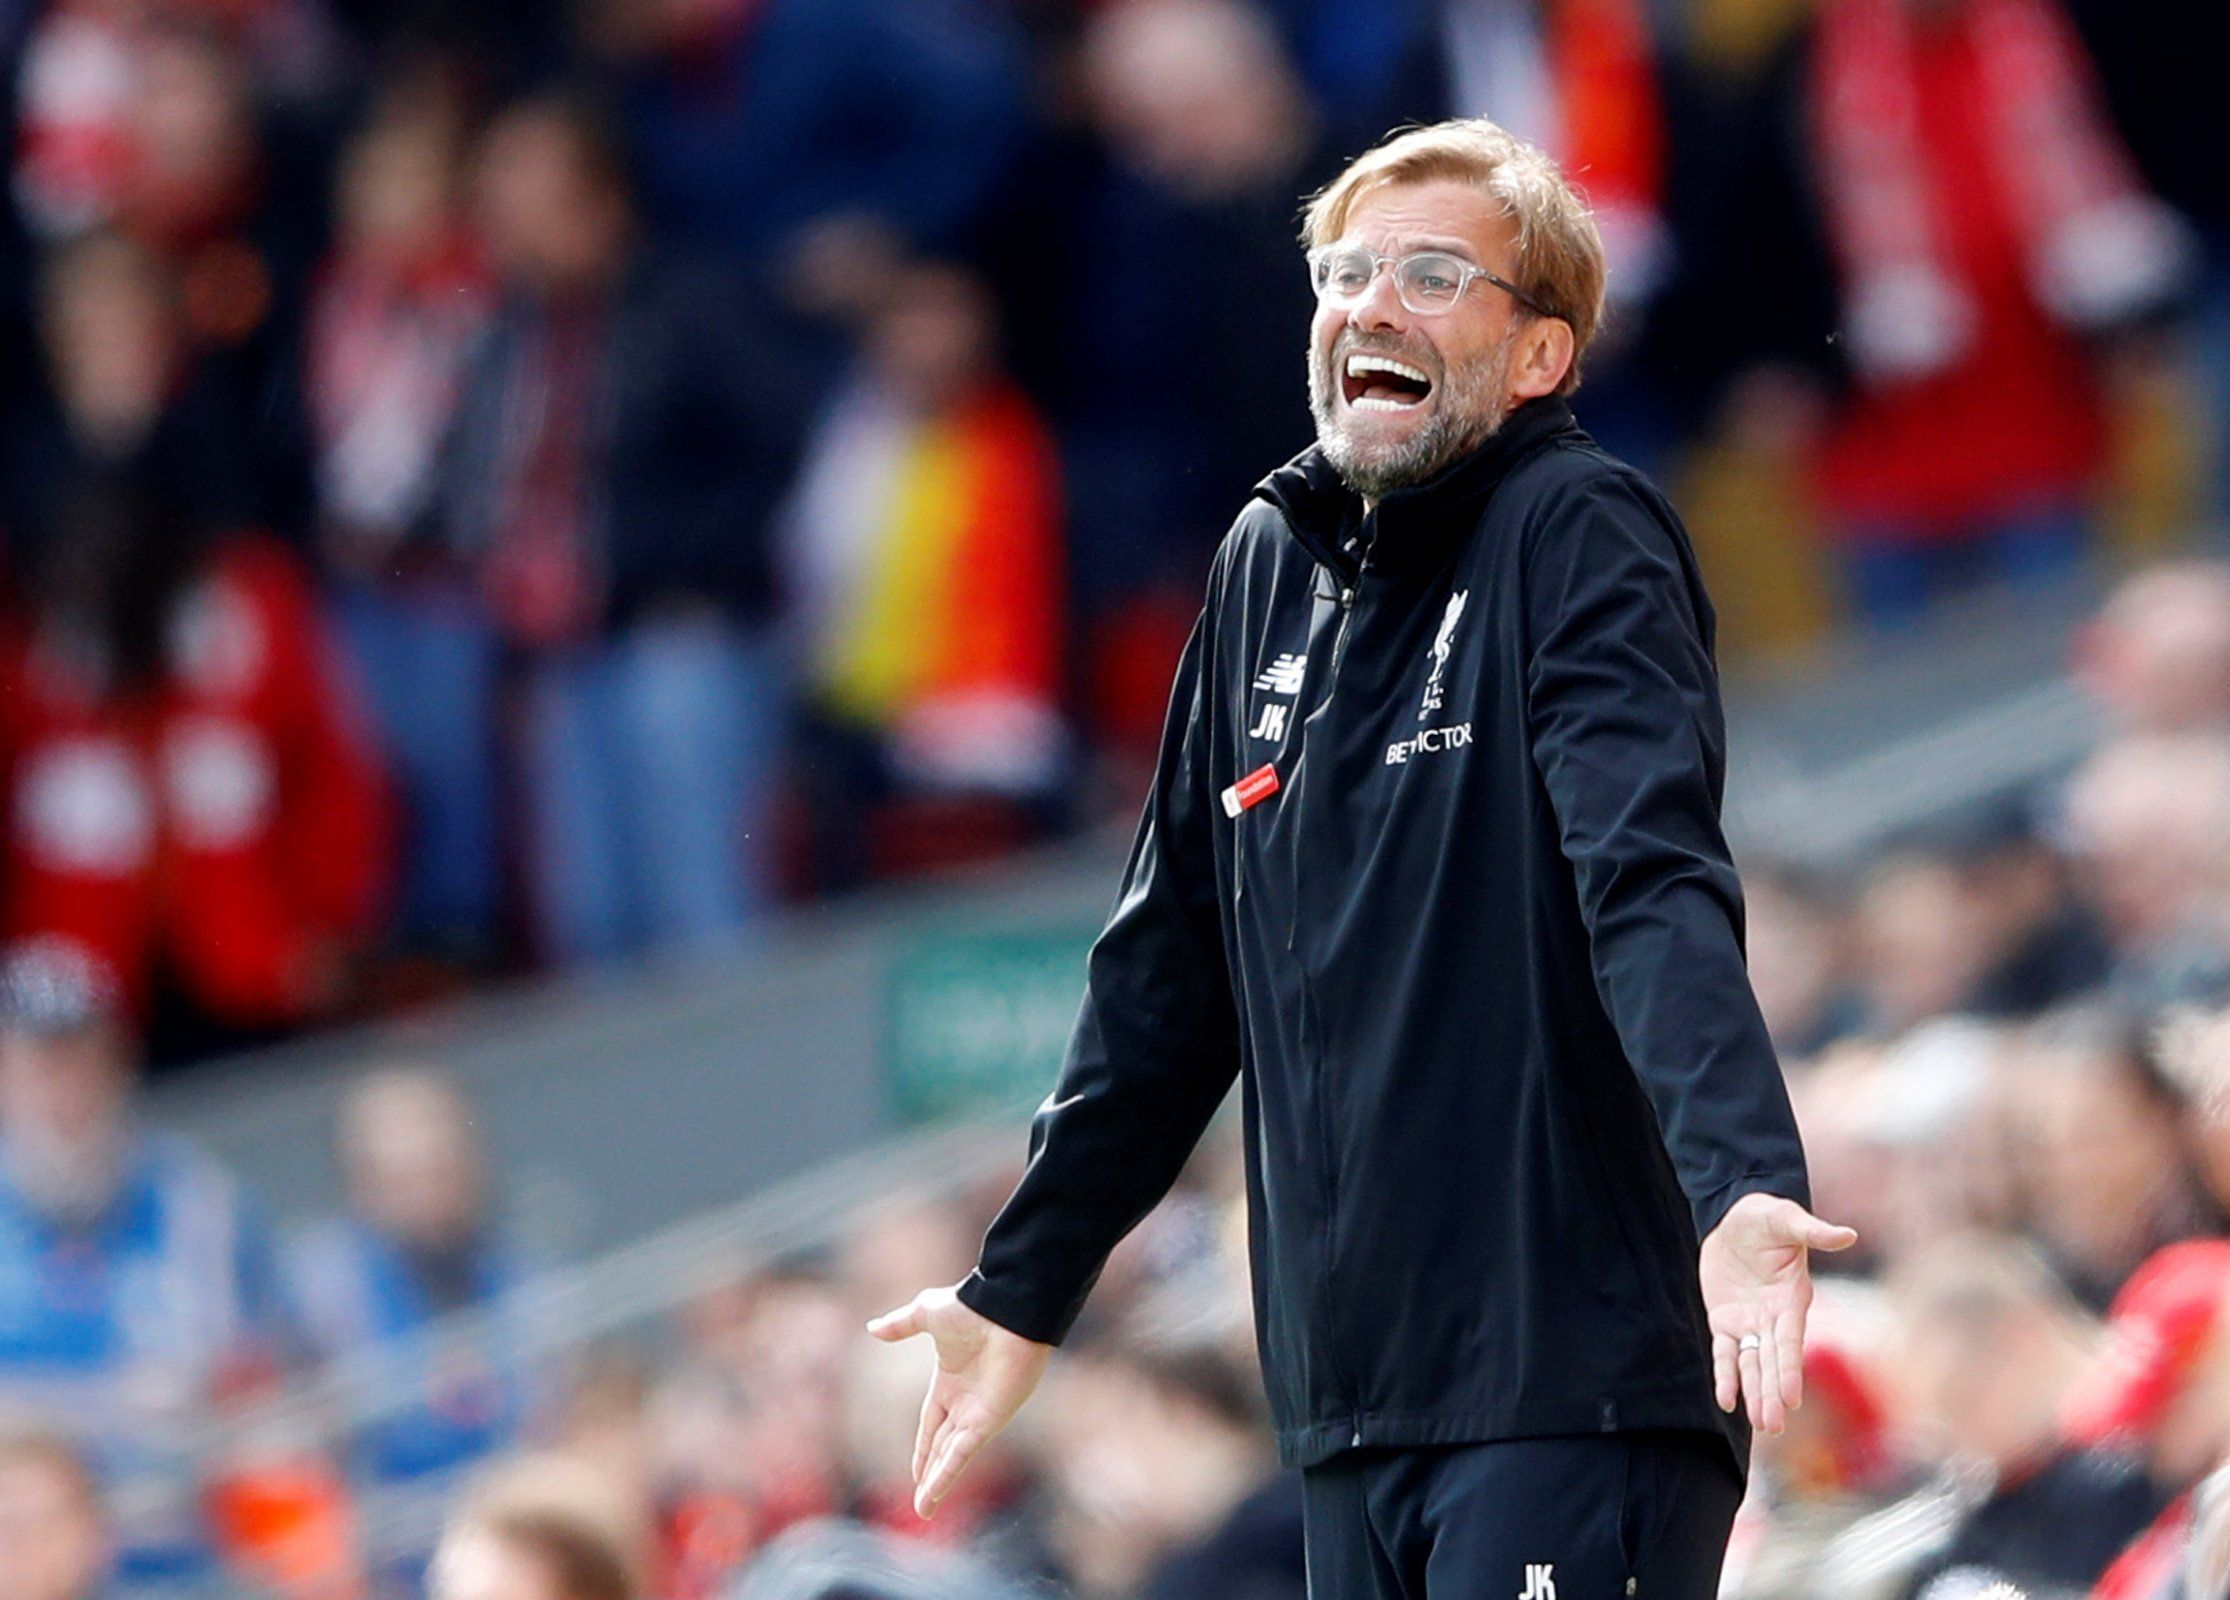 Jurgen Klopp gestures on the touchline during Liverpool's match against Stoke City